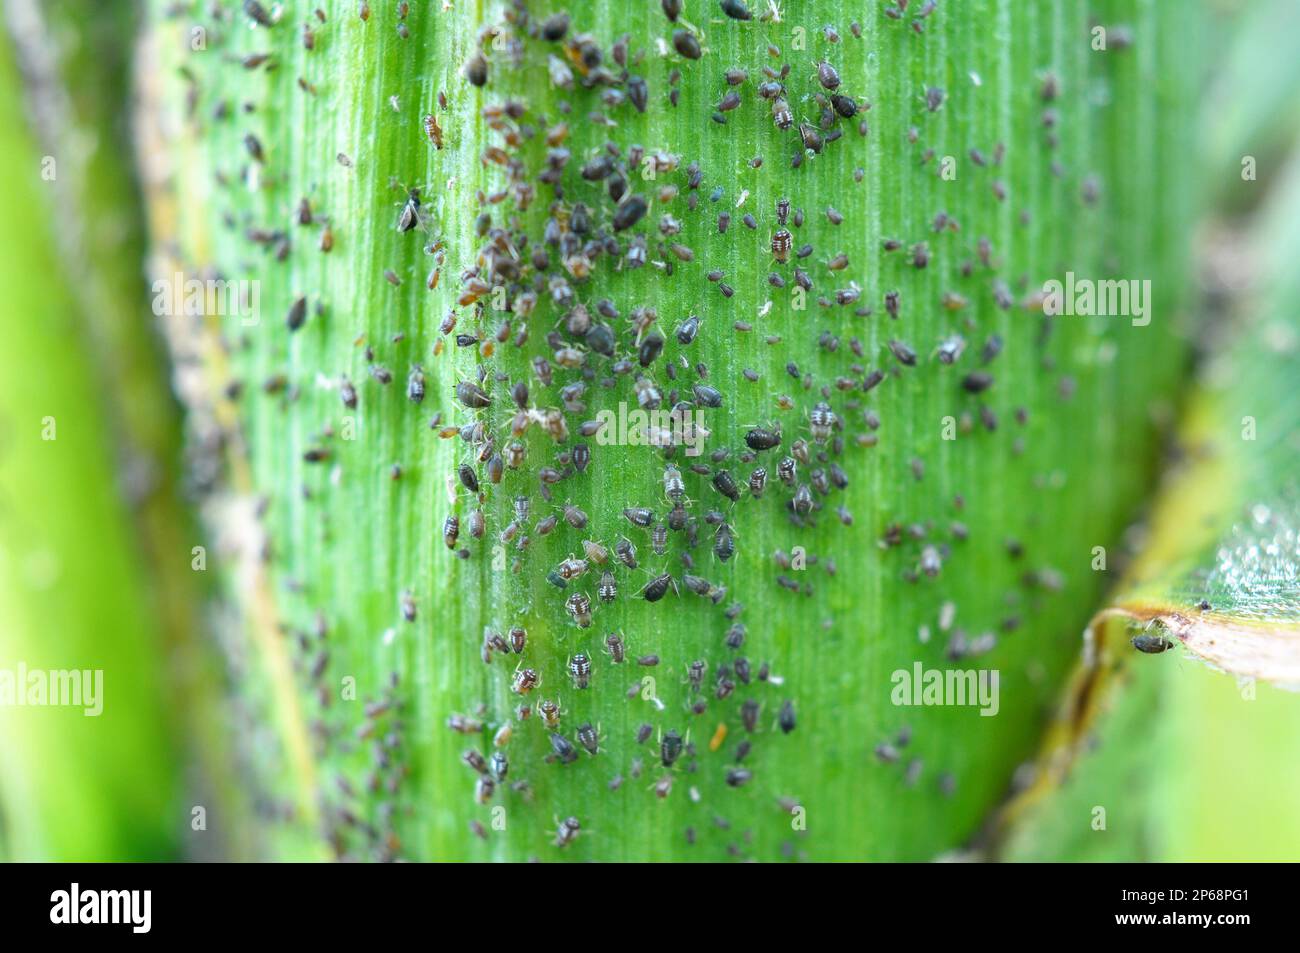 A small herbivorous insect - aphid (Aphidoidea) on a green cob of corn Stock Photo